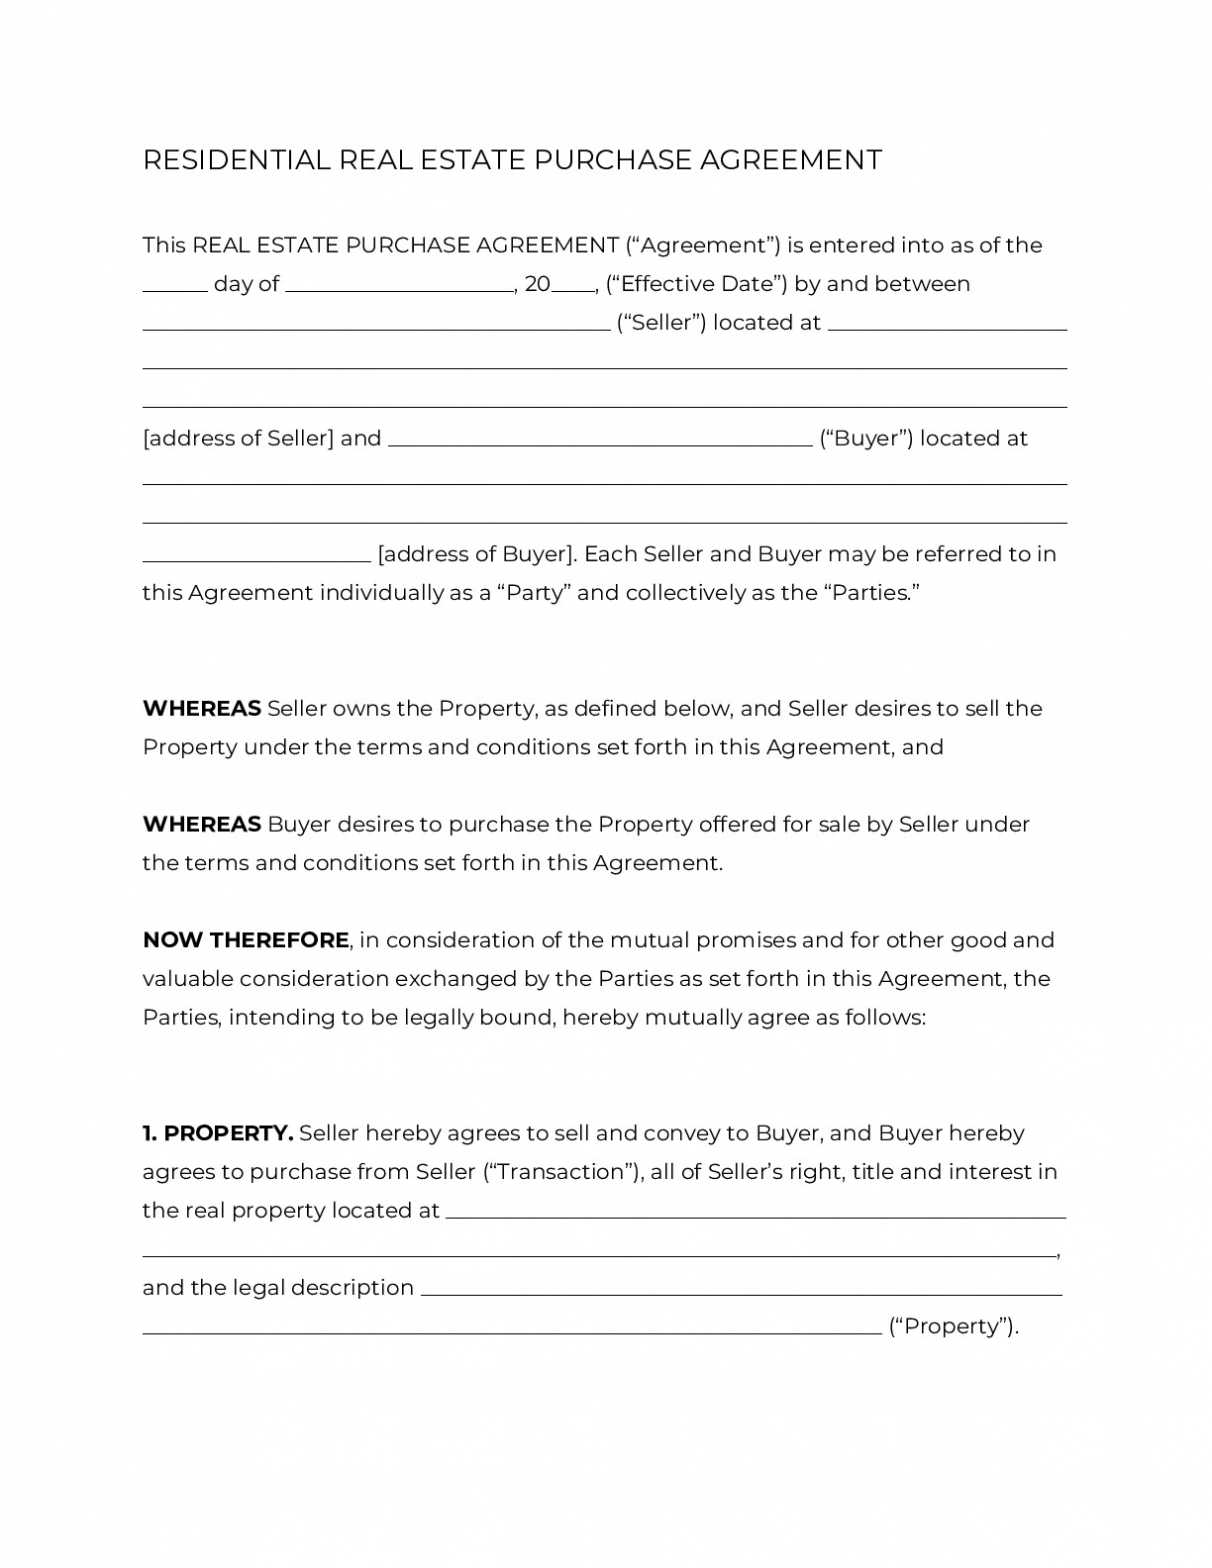 Real Estate Purchase Agreement Form [2021] | Official Pdf pertaining to Home Purchase Agreement Template